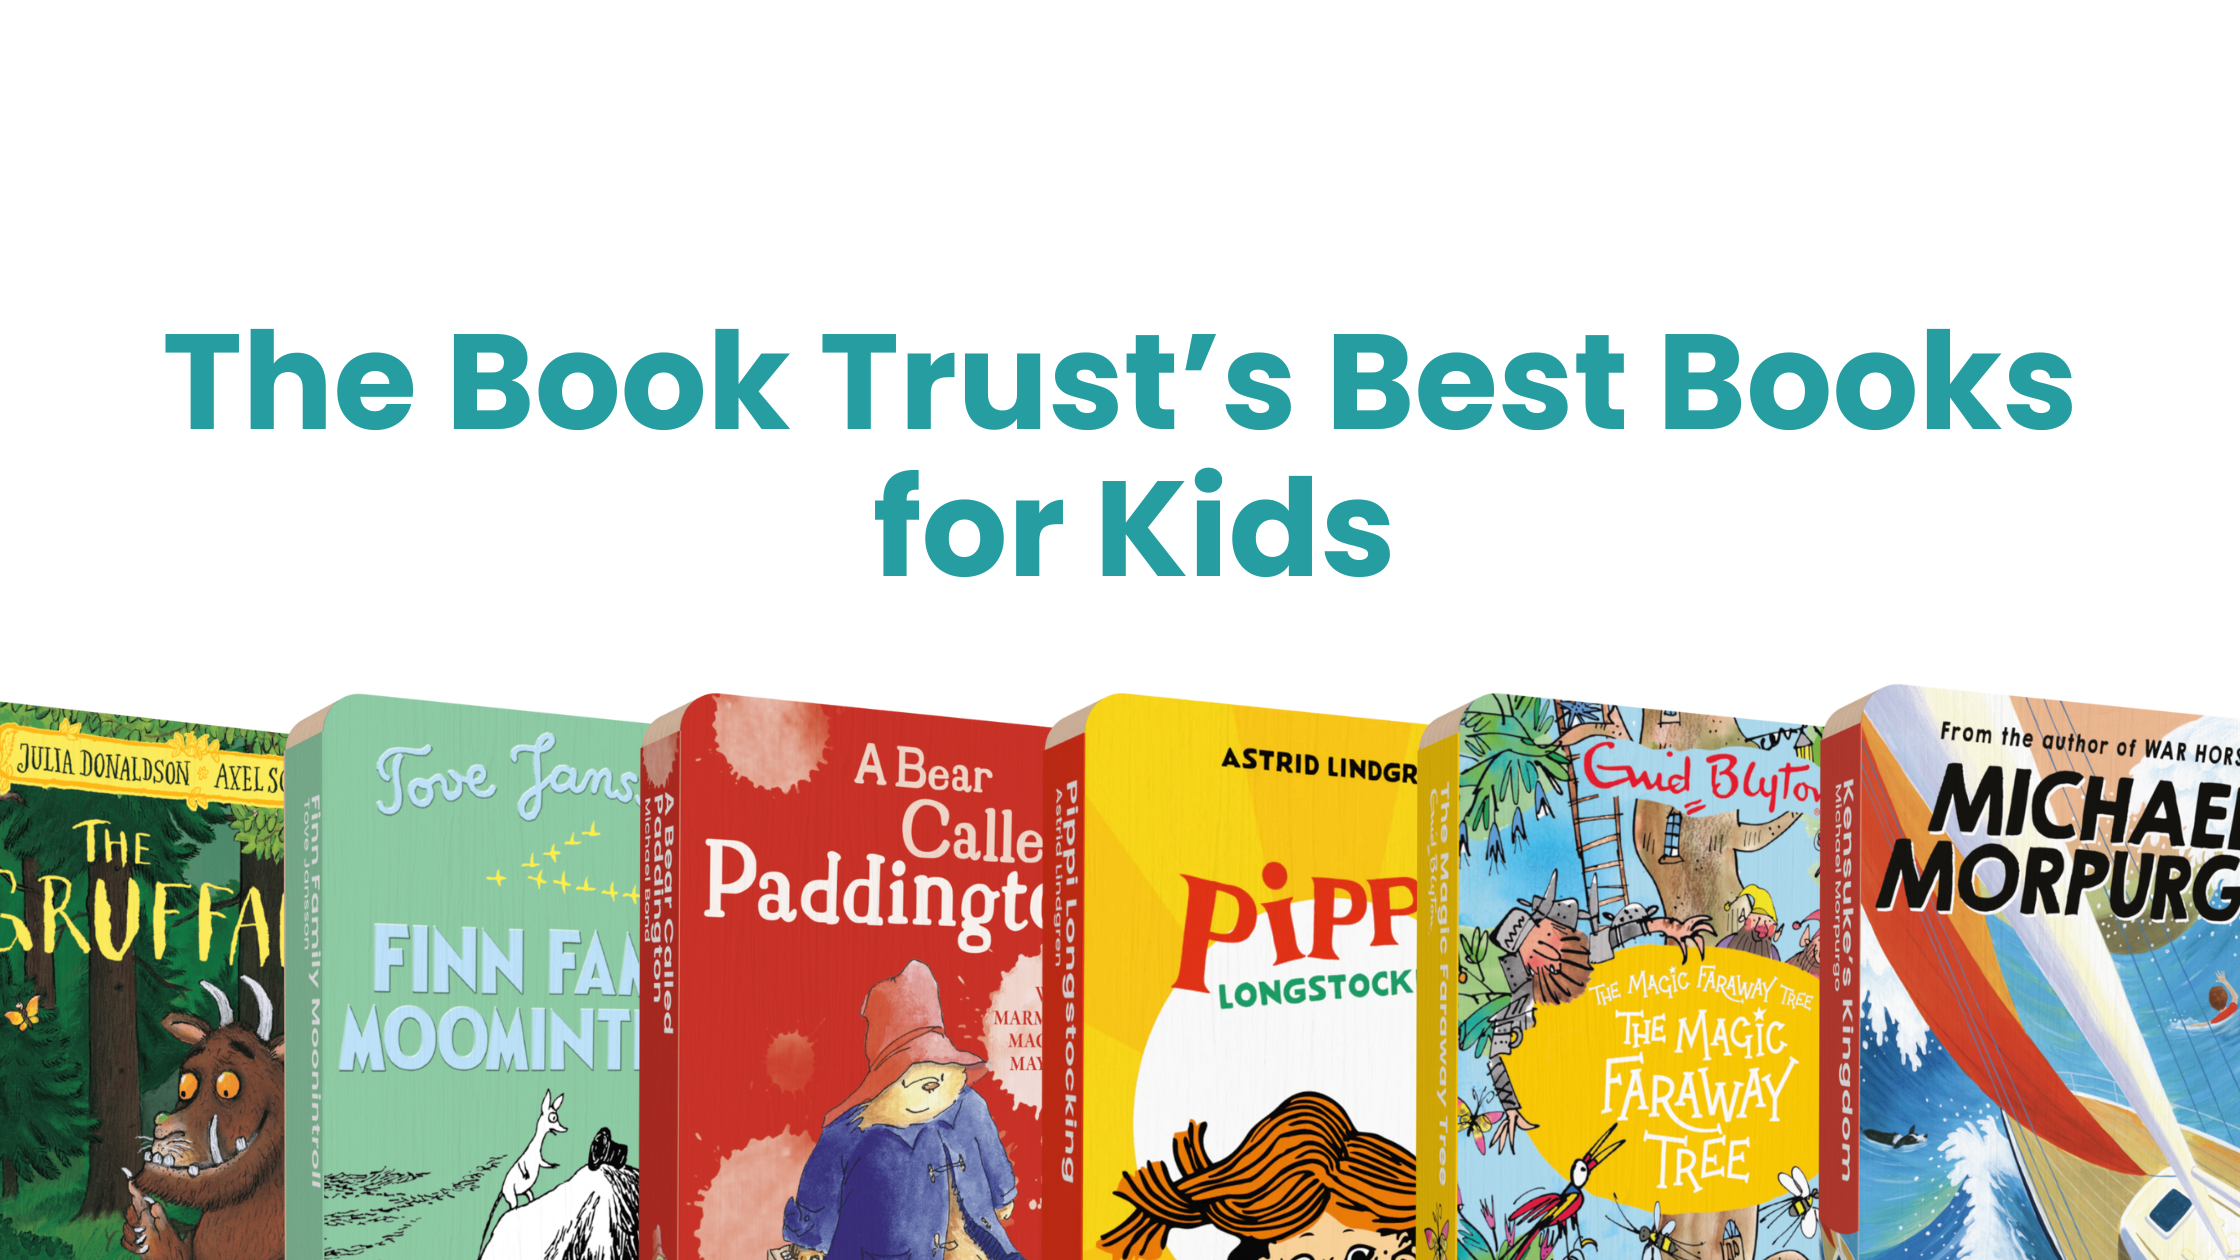 The Book Trust's Best Books for Kids